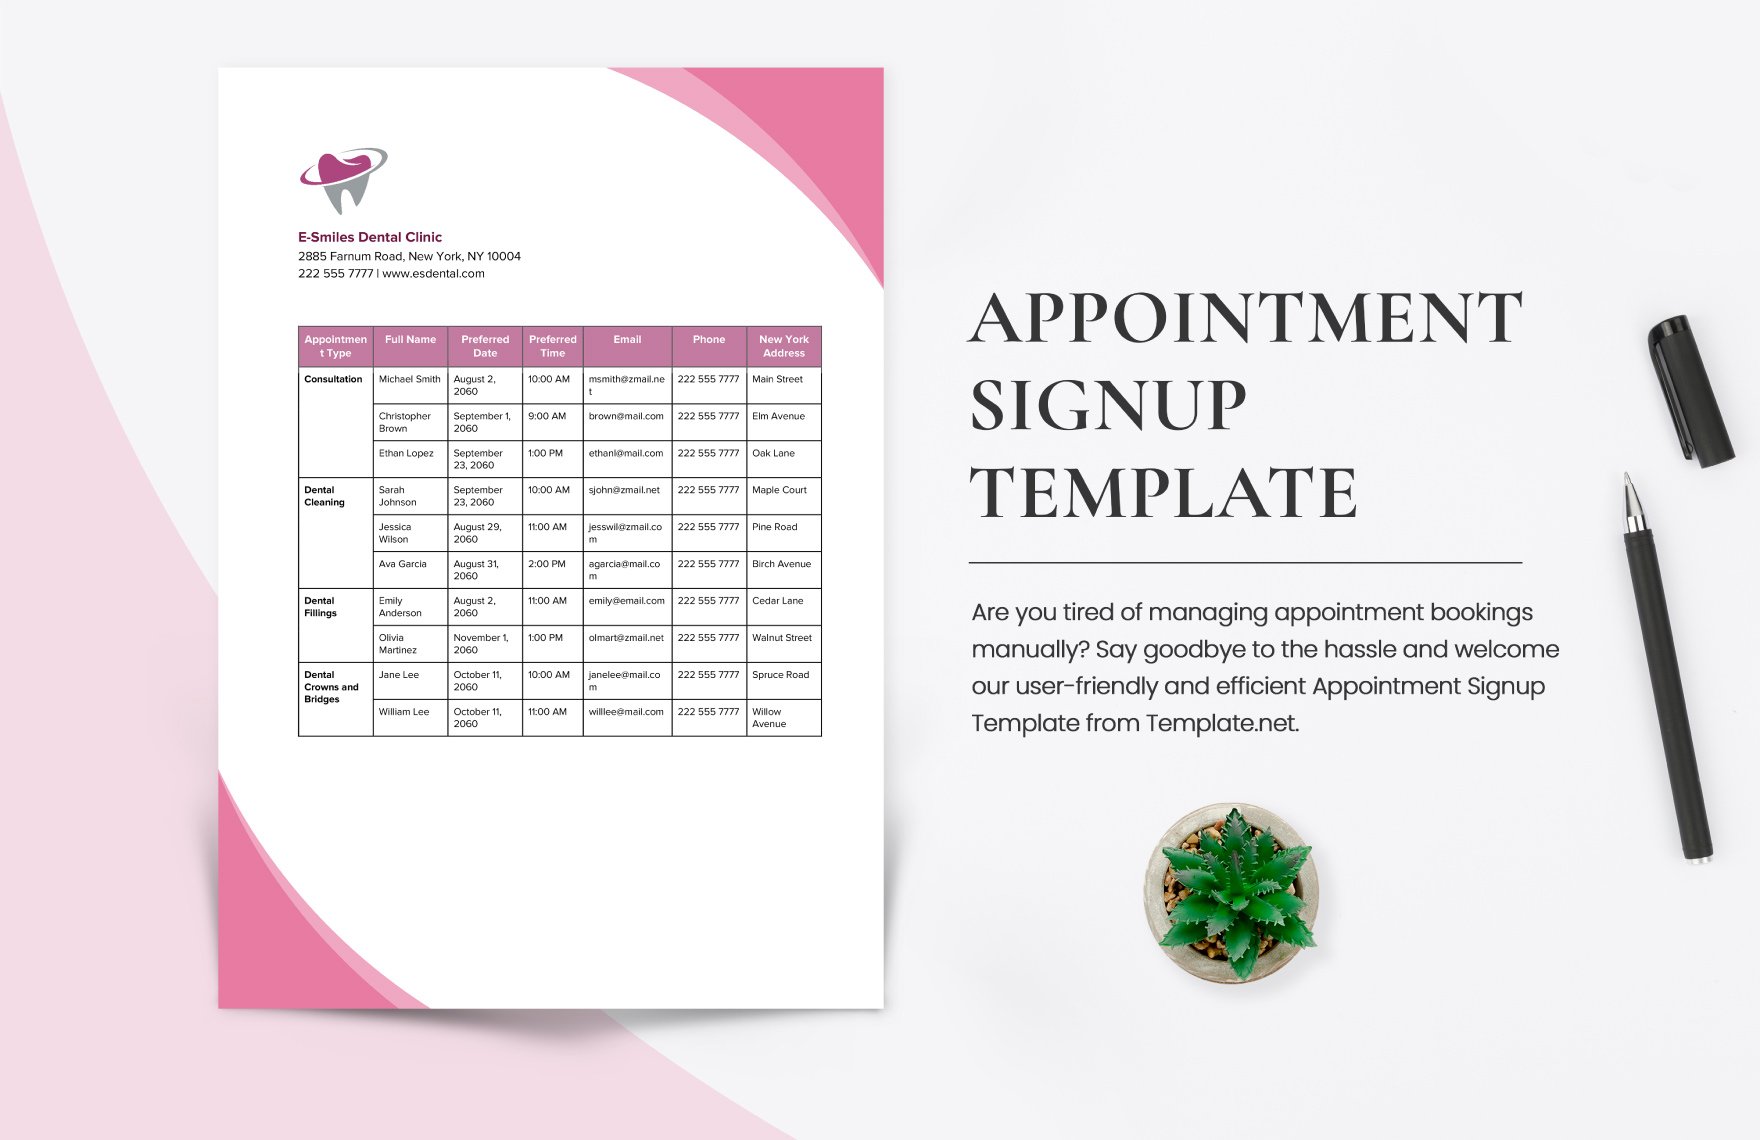 Appointment Signup Template